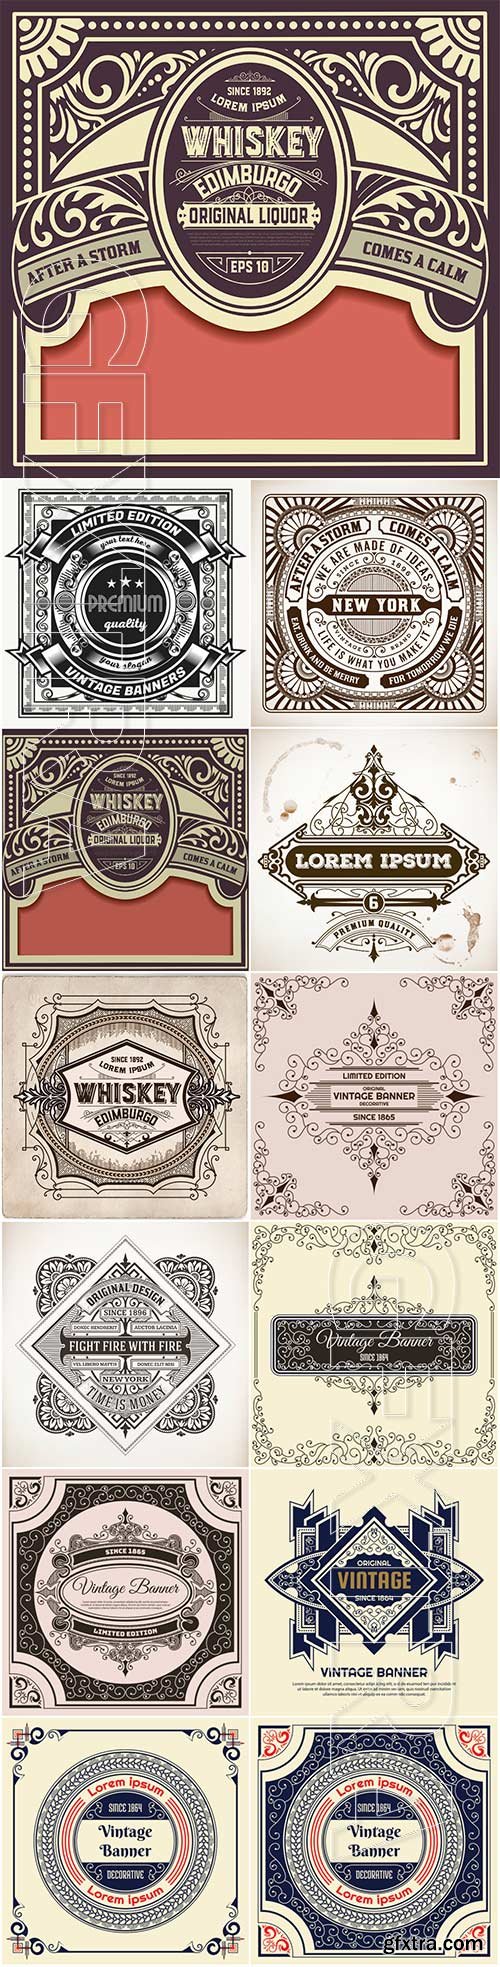 Labels in vintage style, vector elements